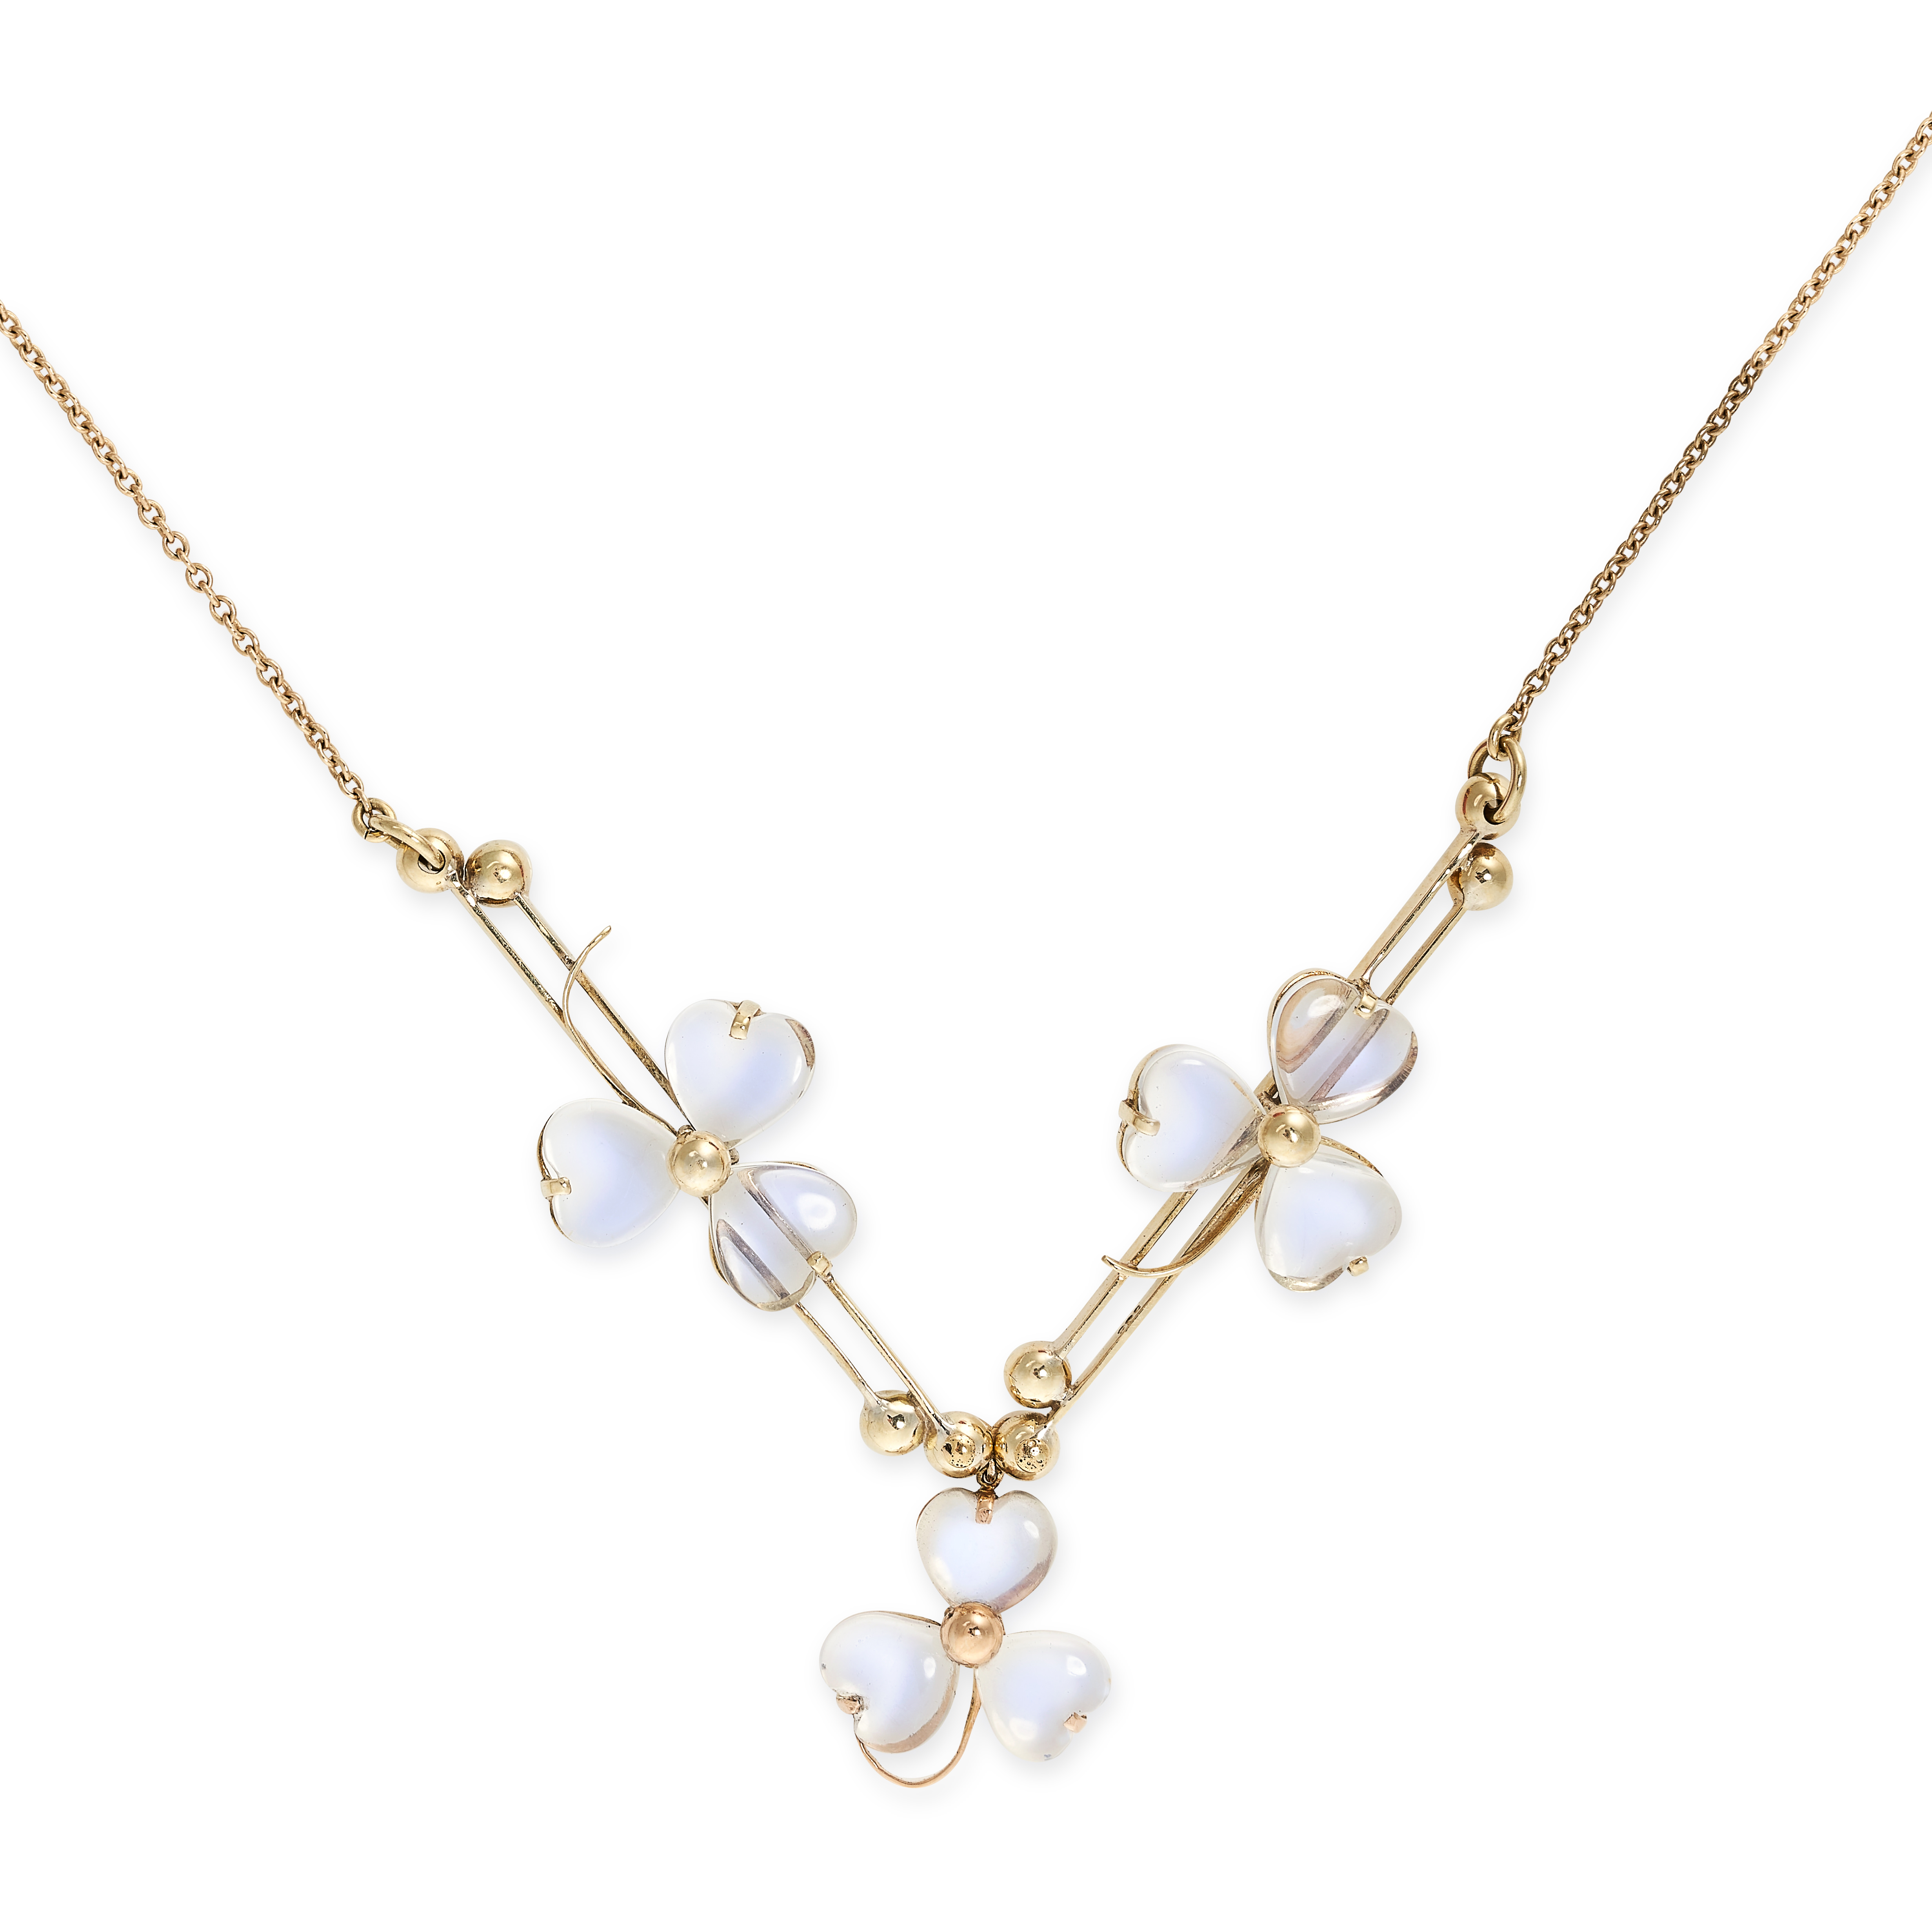 A VINTAGE MOONSTONE SHAMROCK NECKLACE in 14ct yellow gold, formed of baton links applied with and